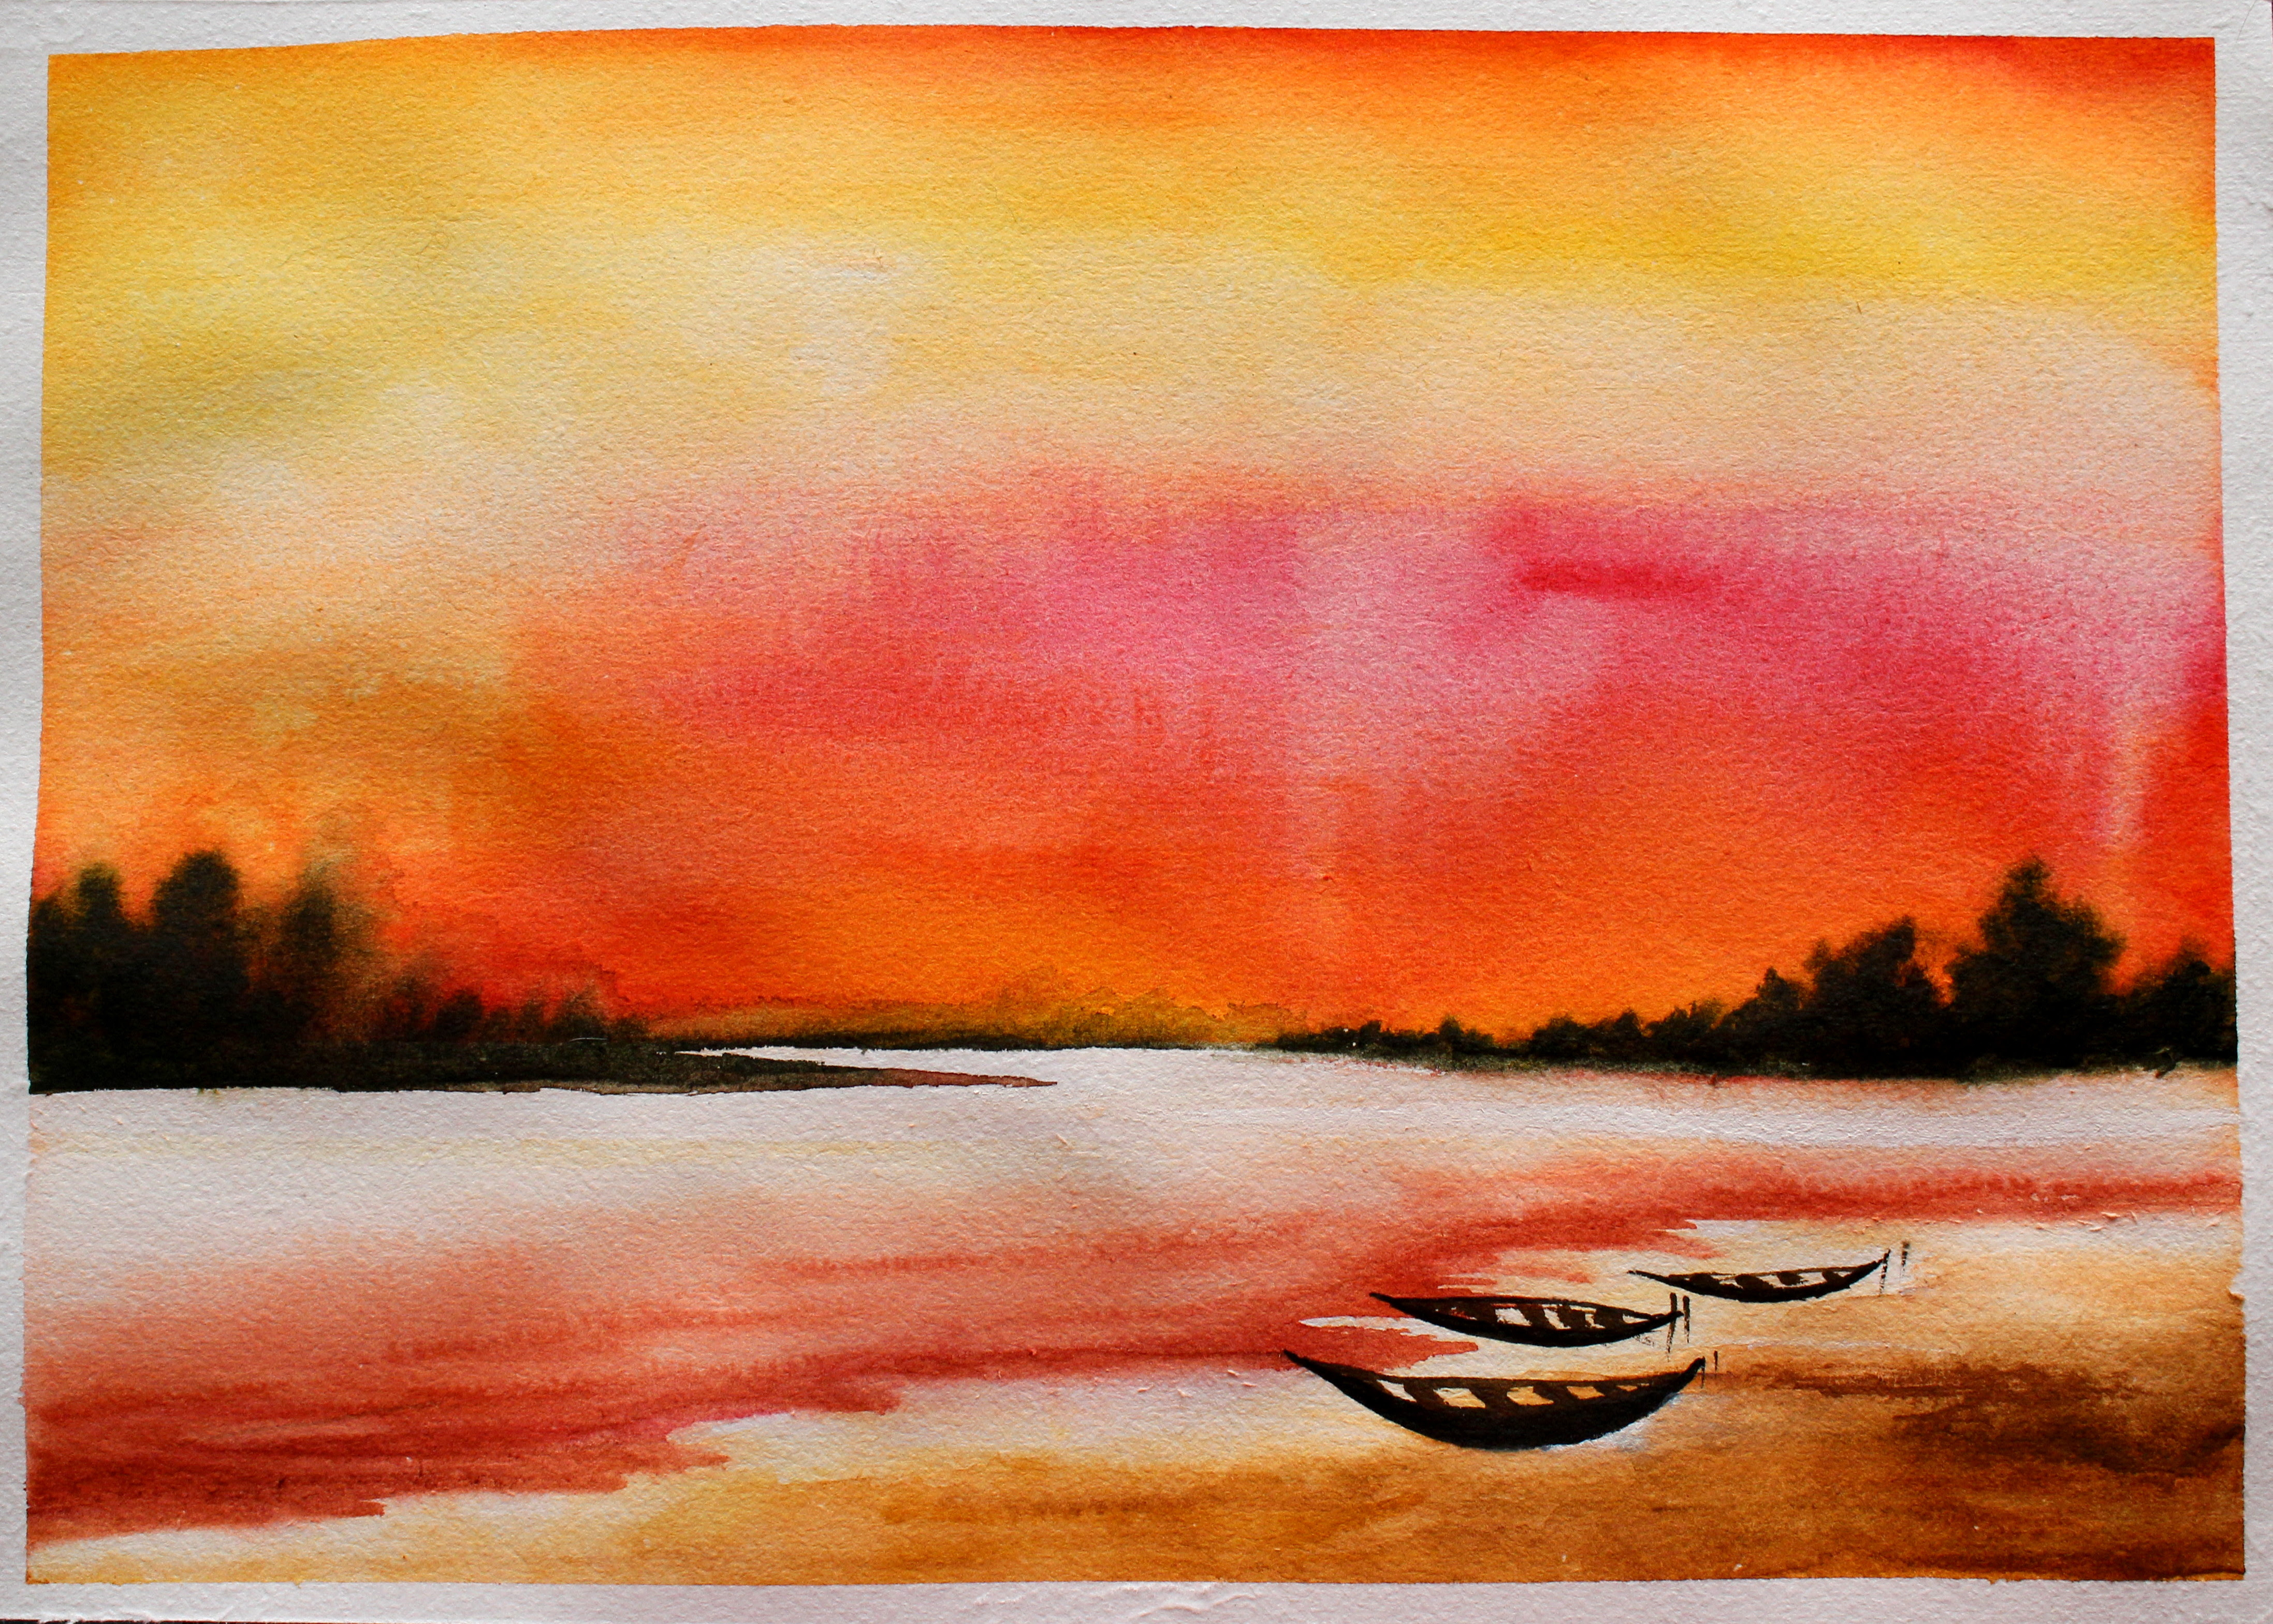 Landscape Sunset Landscape Easy Watercolor Paintings To Copy - Healthy Care